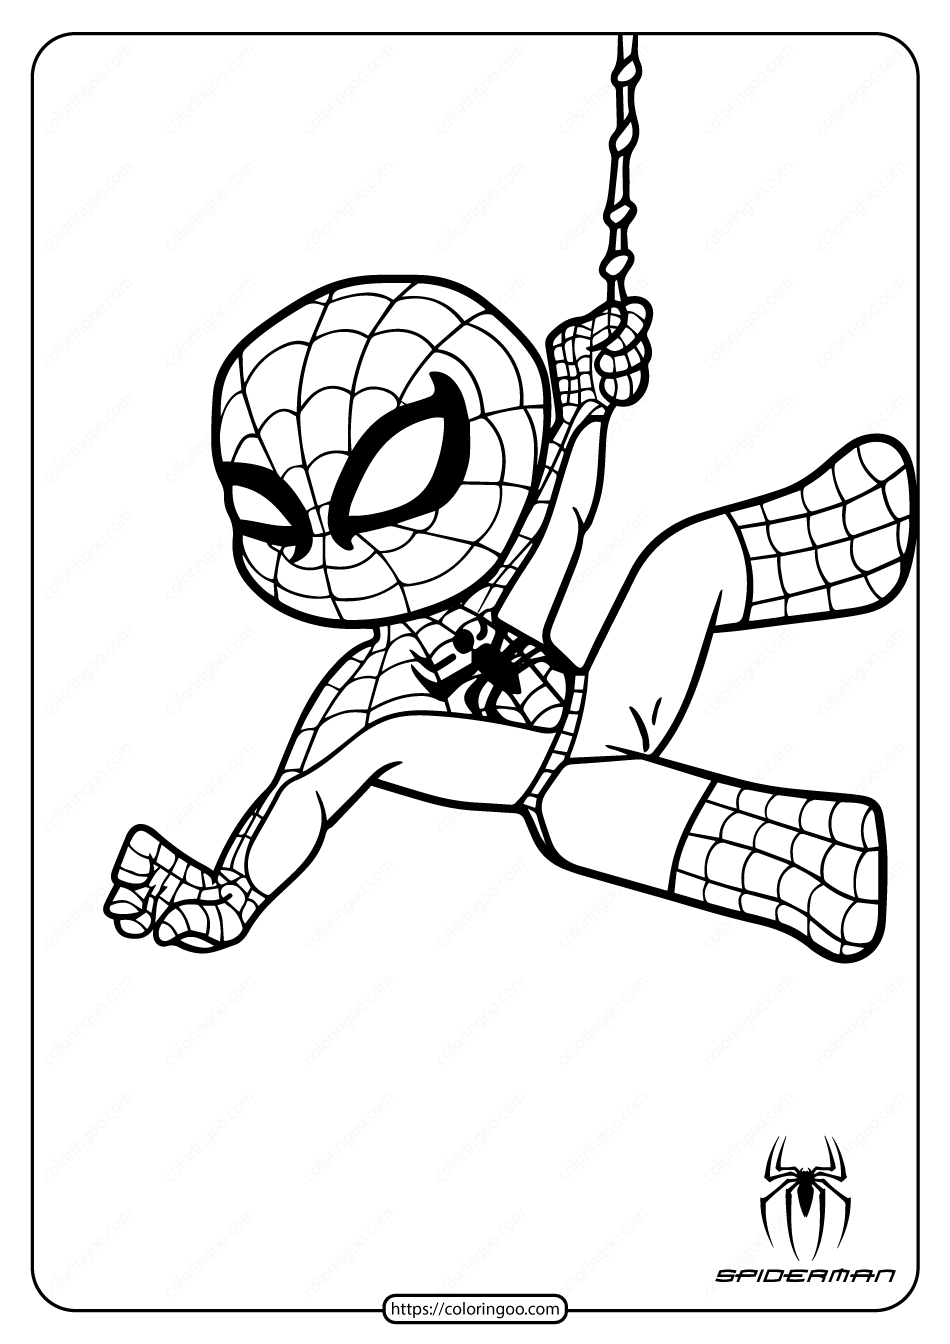 Spiderman Coloring Pages: Free, Printable, and Easy for Ki